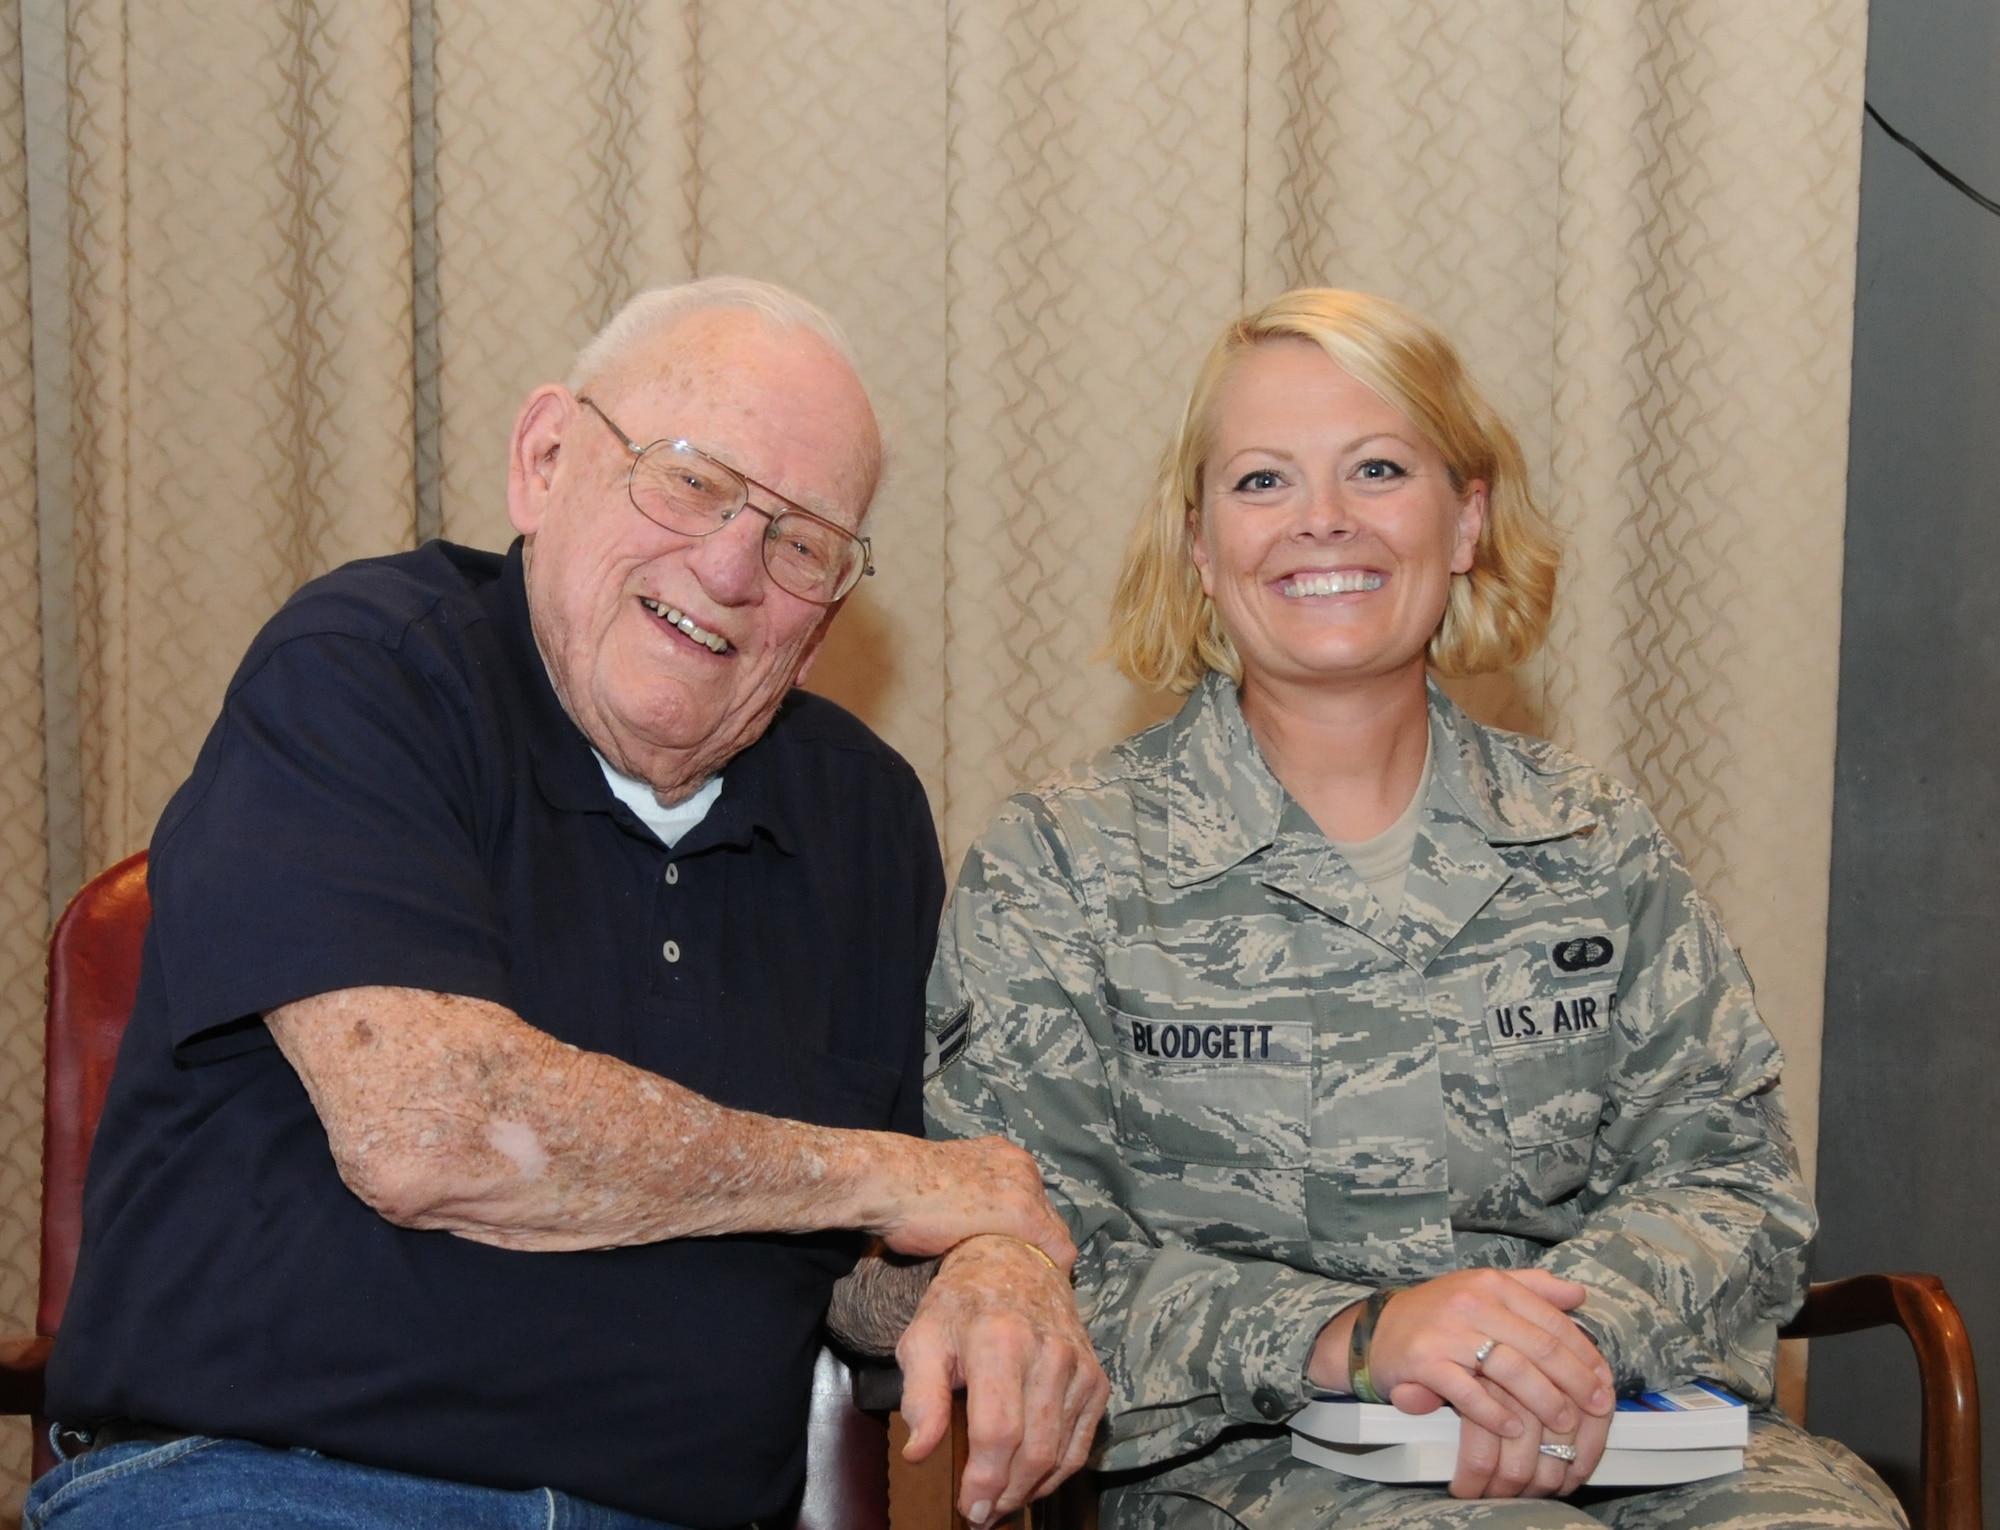 Airman 1st Class Amanda Blodgett, 173rd Fighter Wing Finance, has her picture taken with Lynn “Buck” Compton following the presentation August 32, 2011 at Kingsley Field, Klamath Falls, Ore.. She holds in her lap two books written by Compton and Malarkey respectively, recounting their experiences leading up to and during their days as Easy Company paratroopers. The two distinguished veterans happily signed books and took photographs with all who asked.